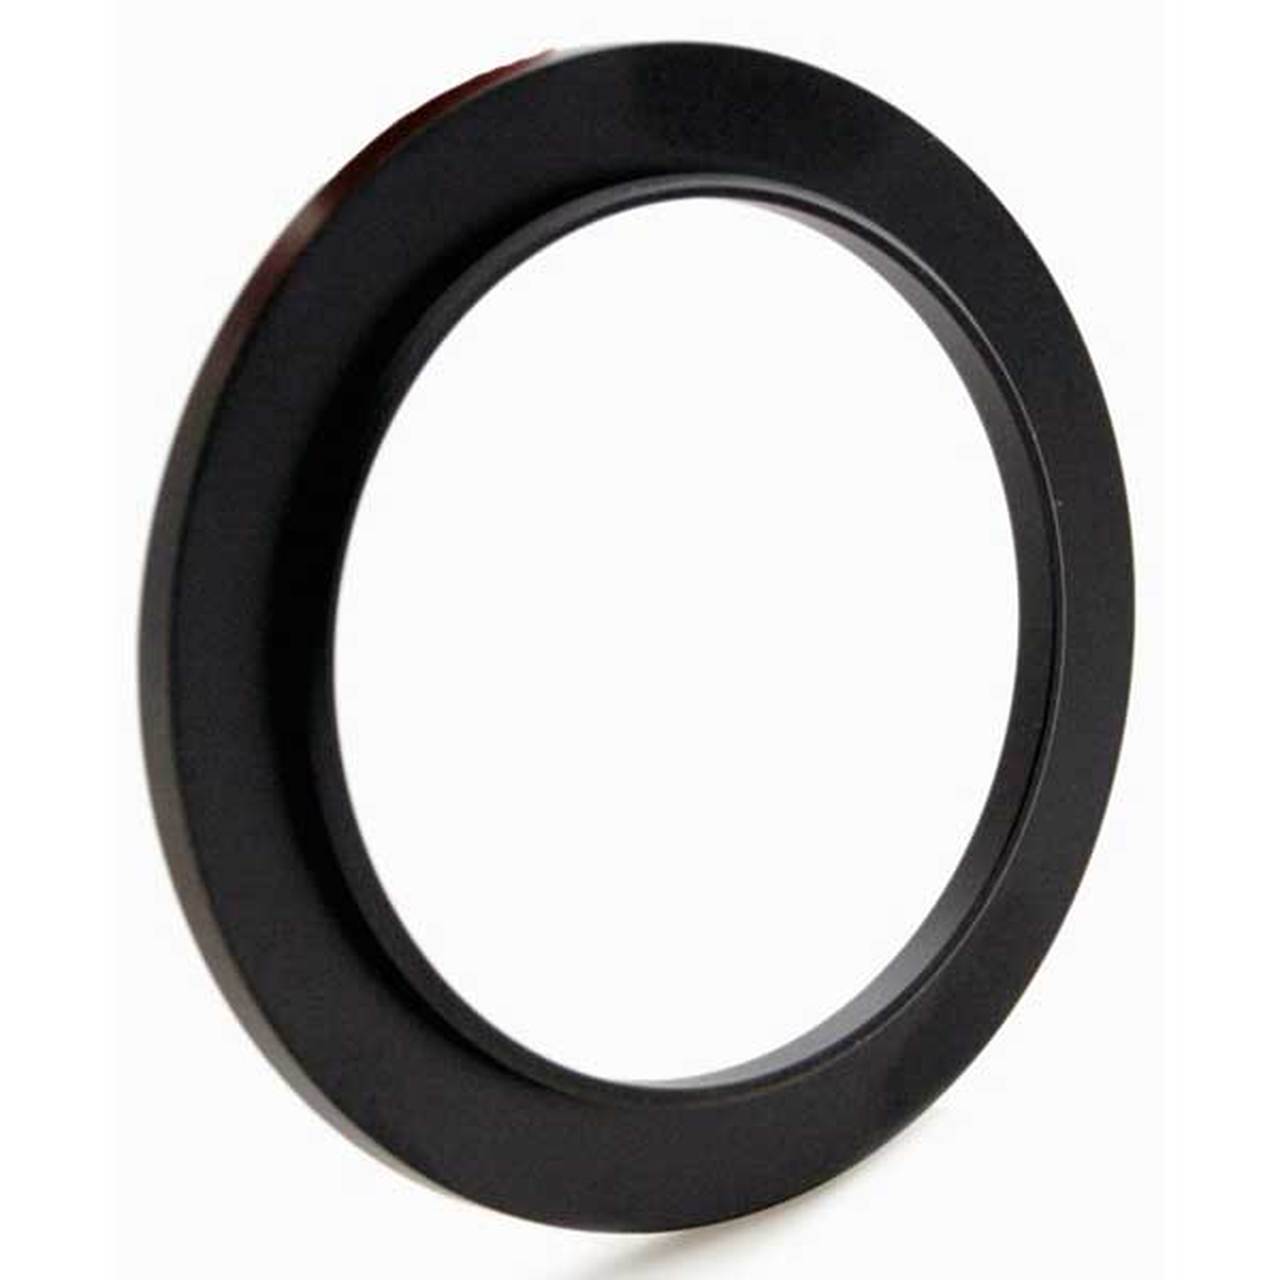 Promaster 7382 52-77mm Step-Up Ring